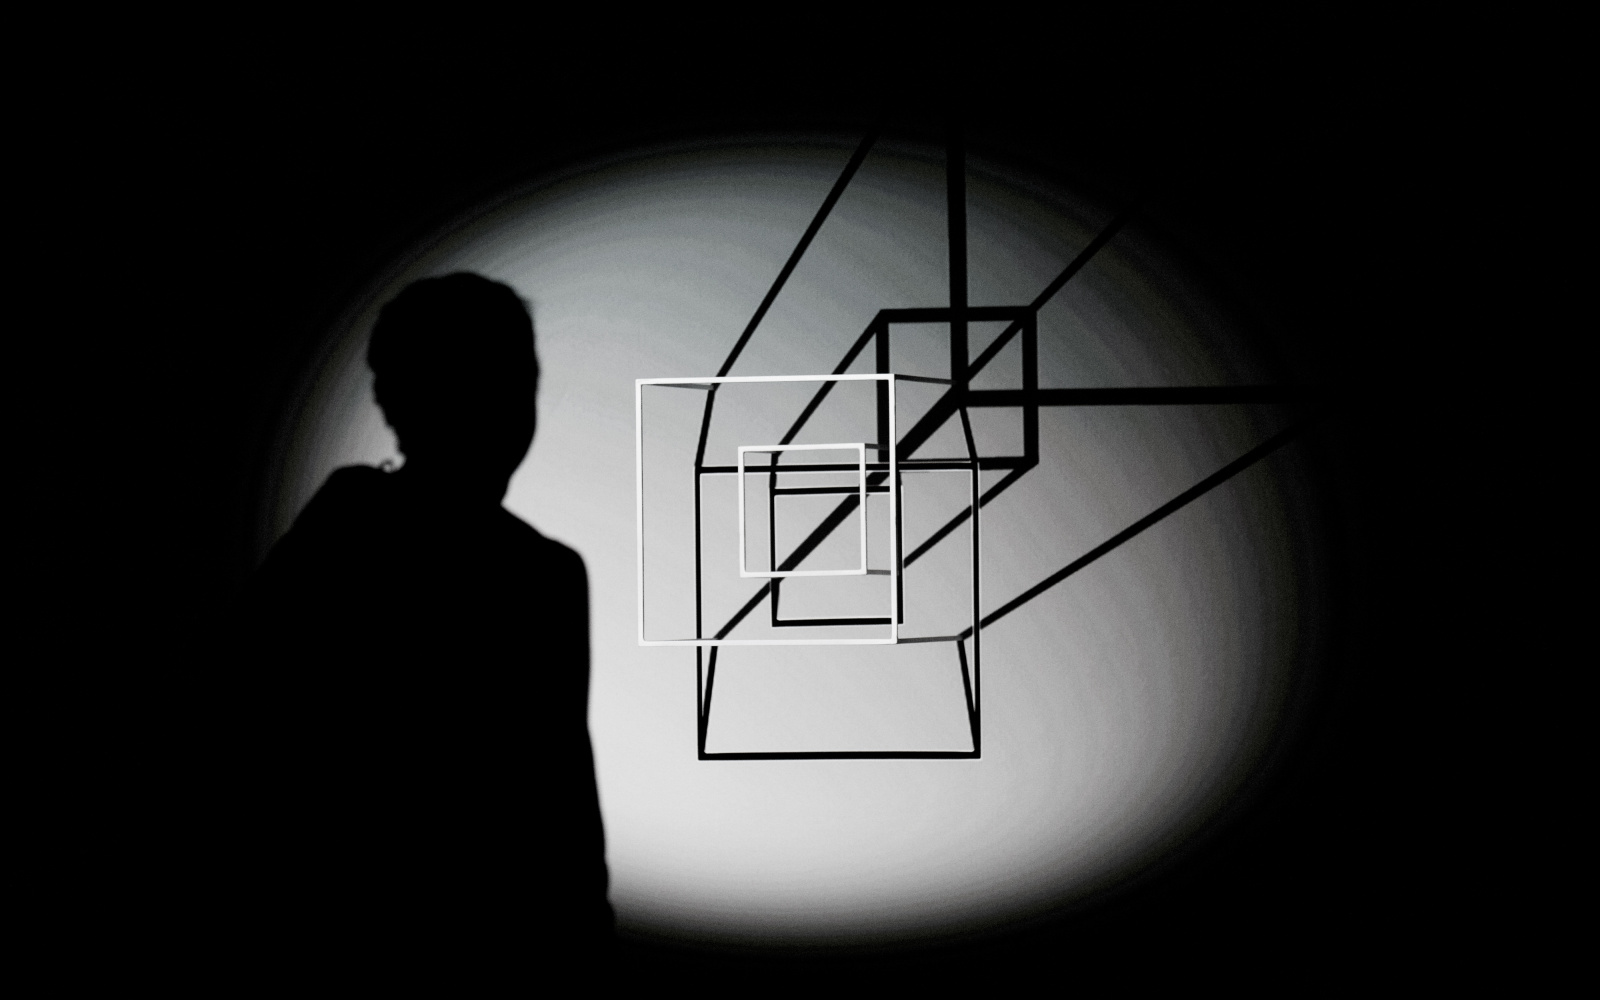 In a cone of light one sees the shadow of a person and two white squares, which also cast a black shadow against the wall.